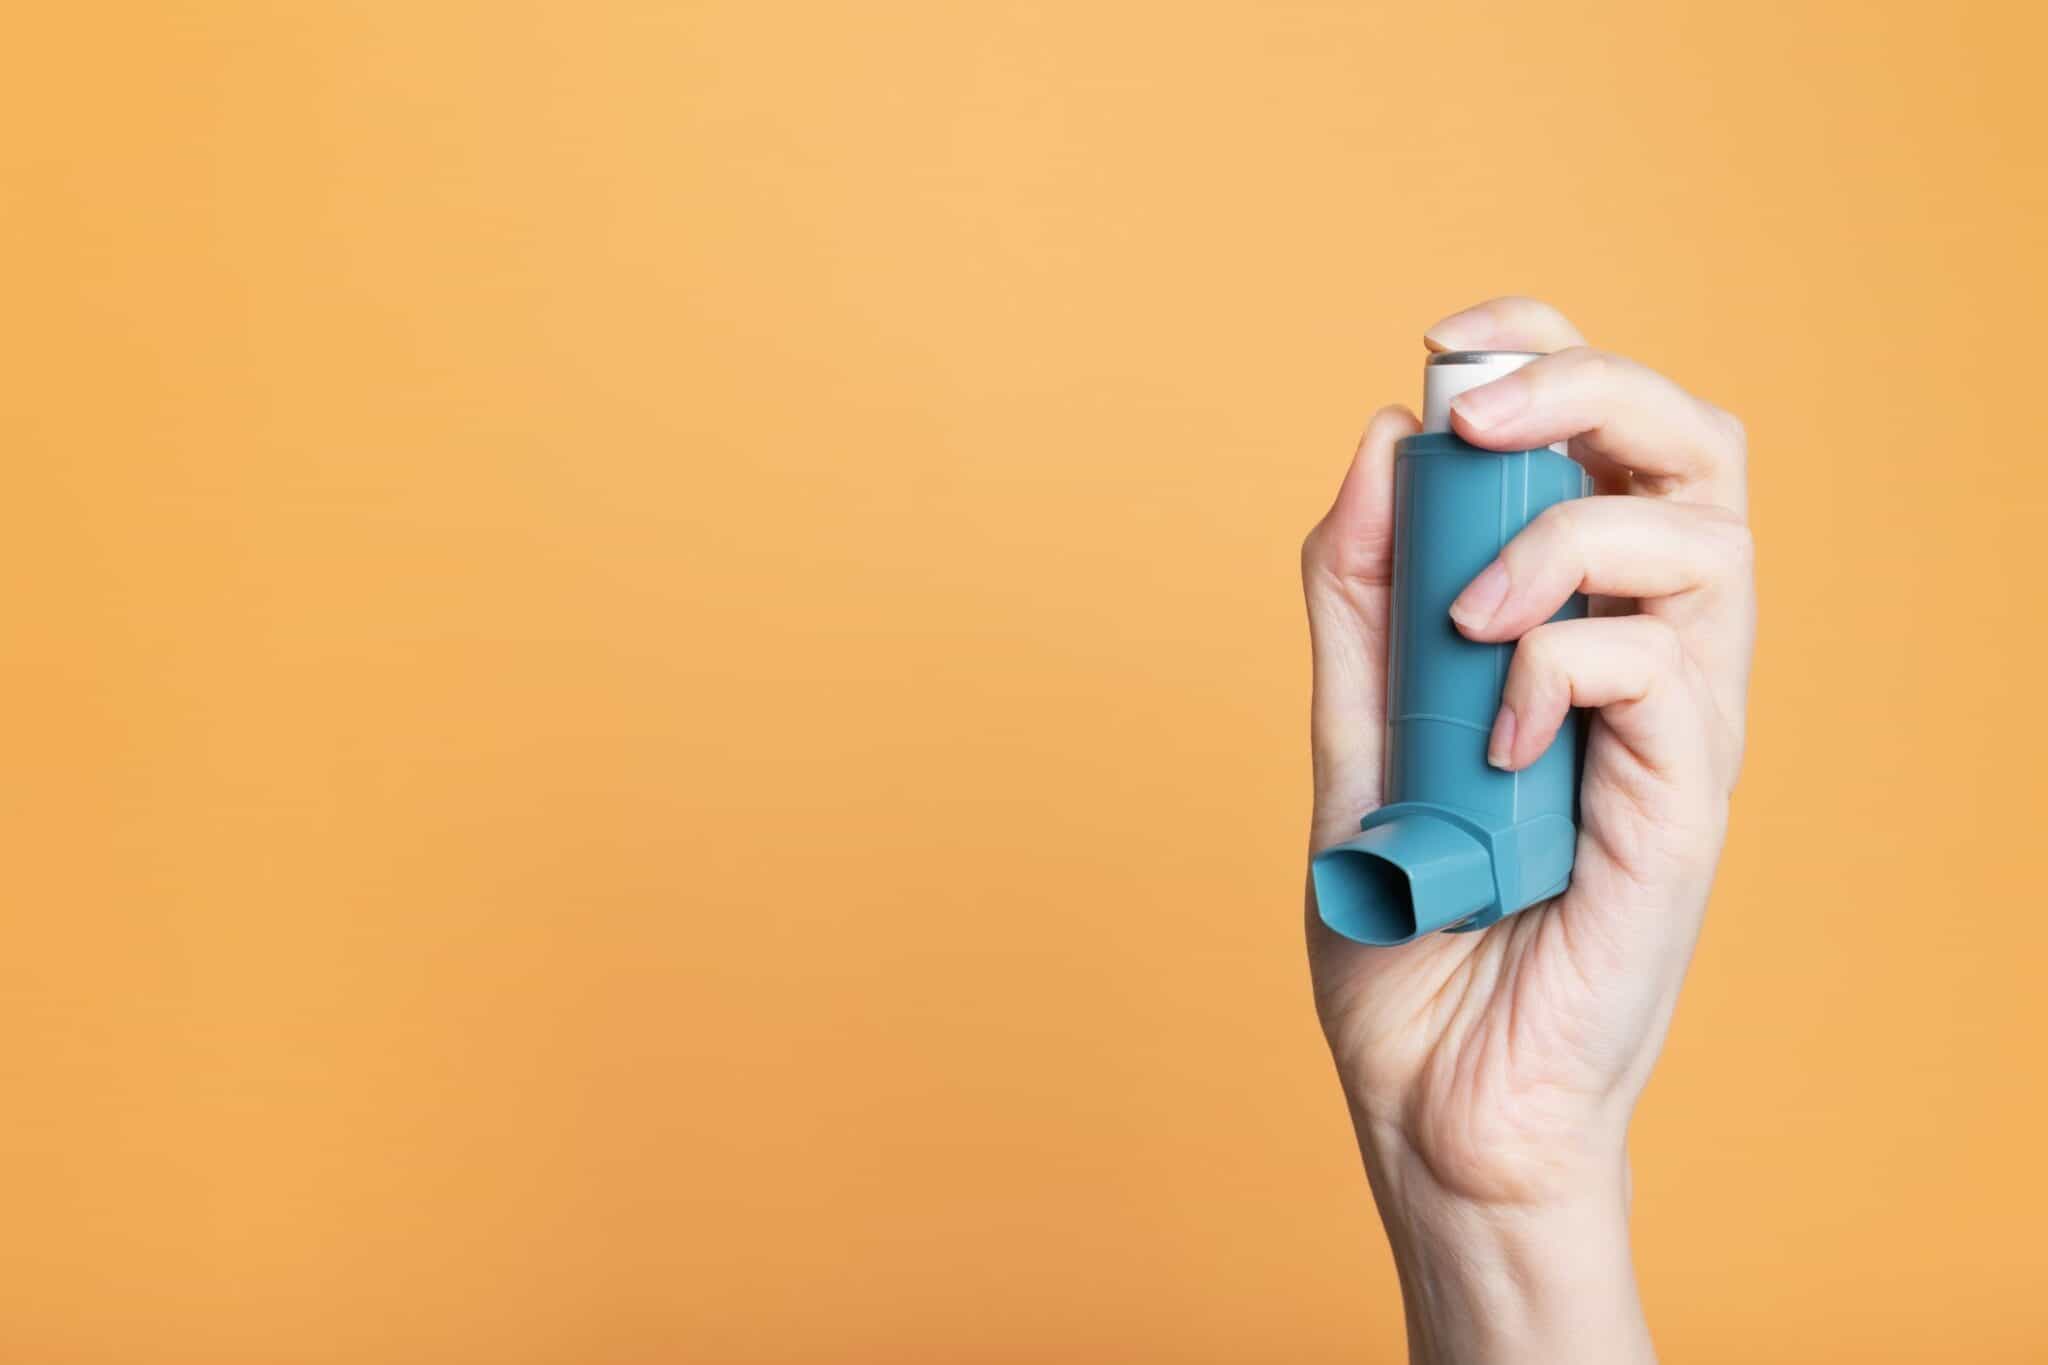 hand-holds-inhaler-to-treat-asthma-world-asthma-day-concept-of-allergy-care-copy-space_t20_PJ8kaR